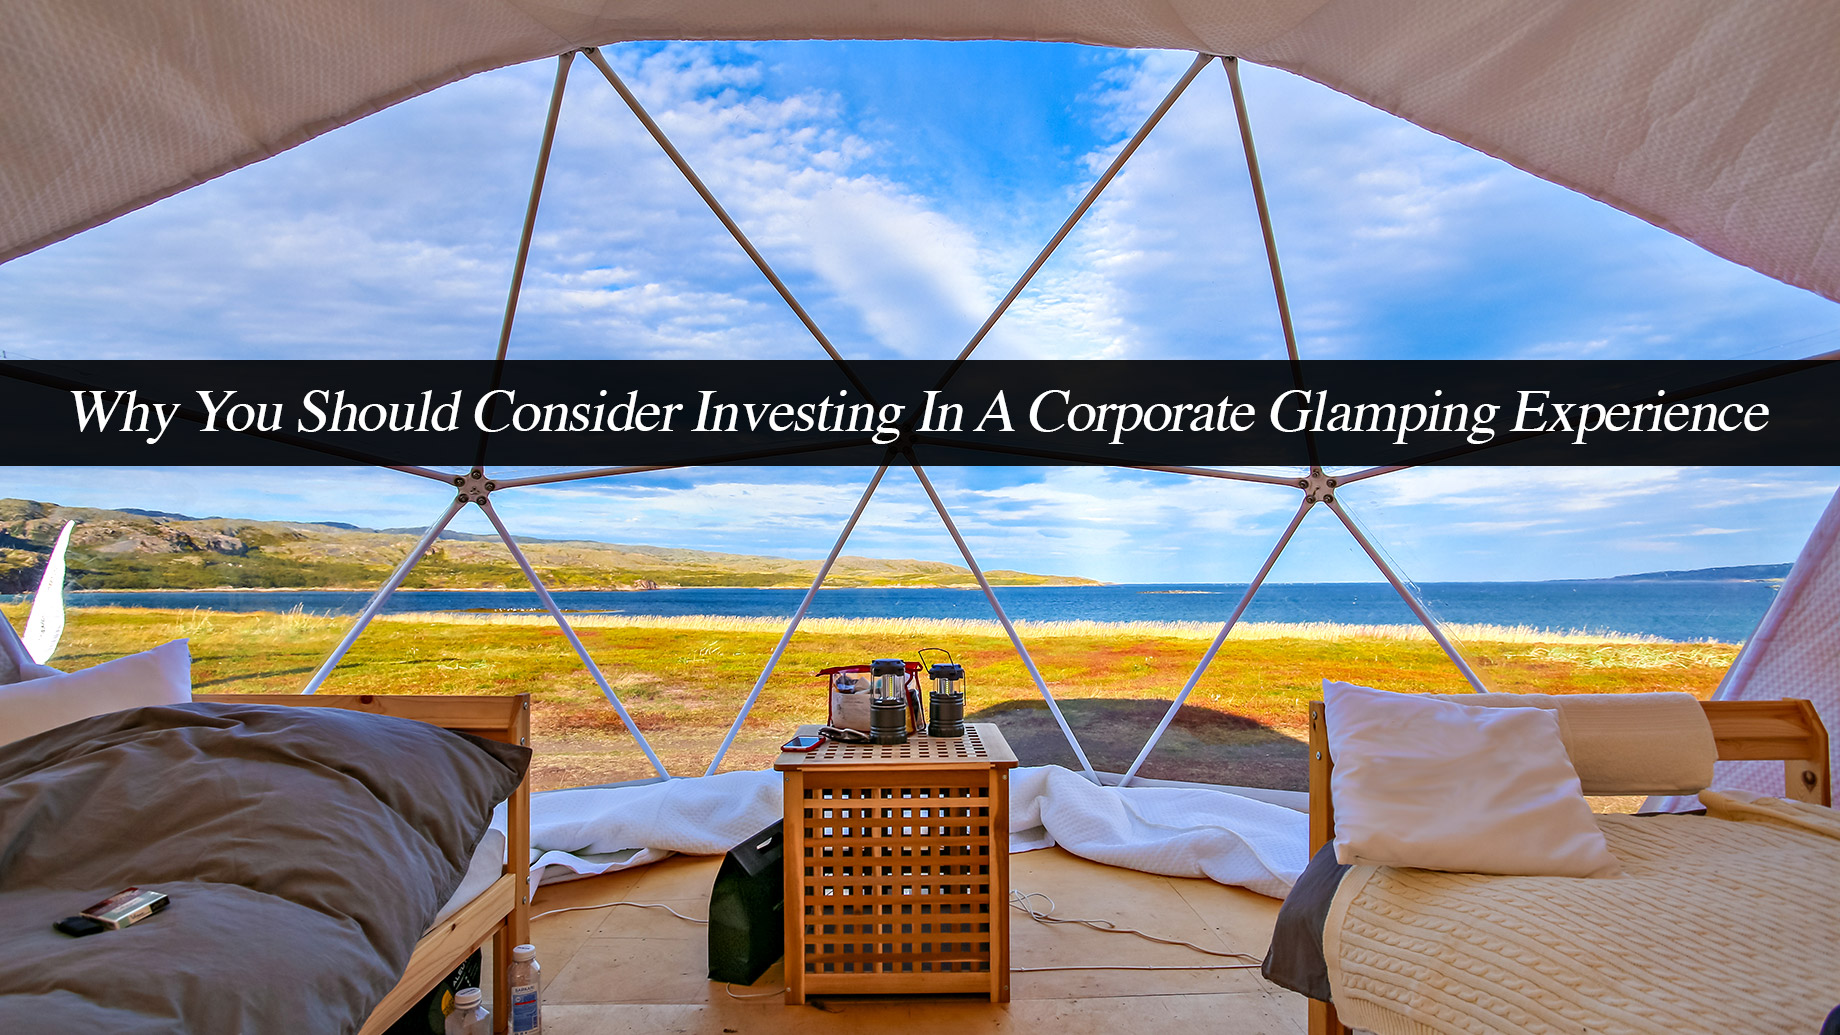 Why You Should Consider Investing In A Corporate Glamping Experience